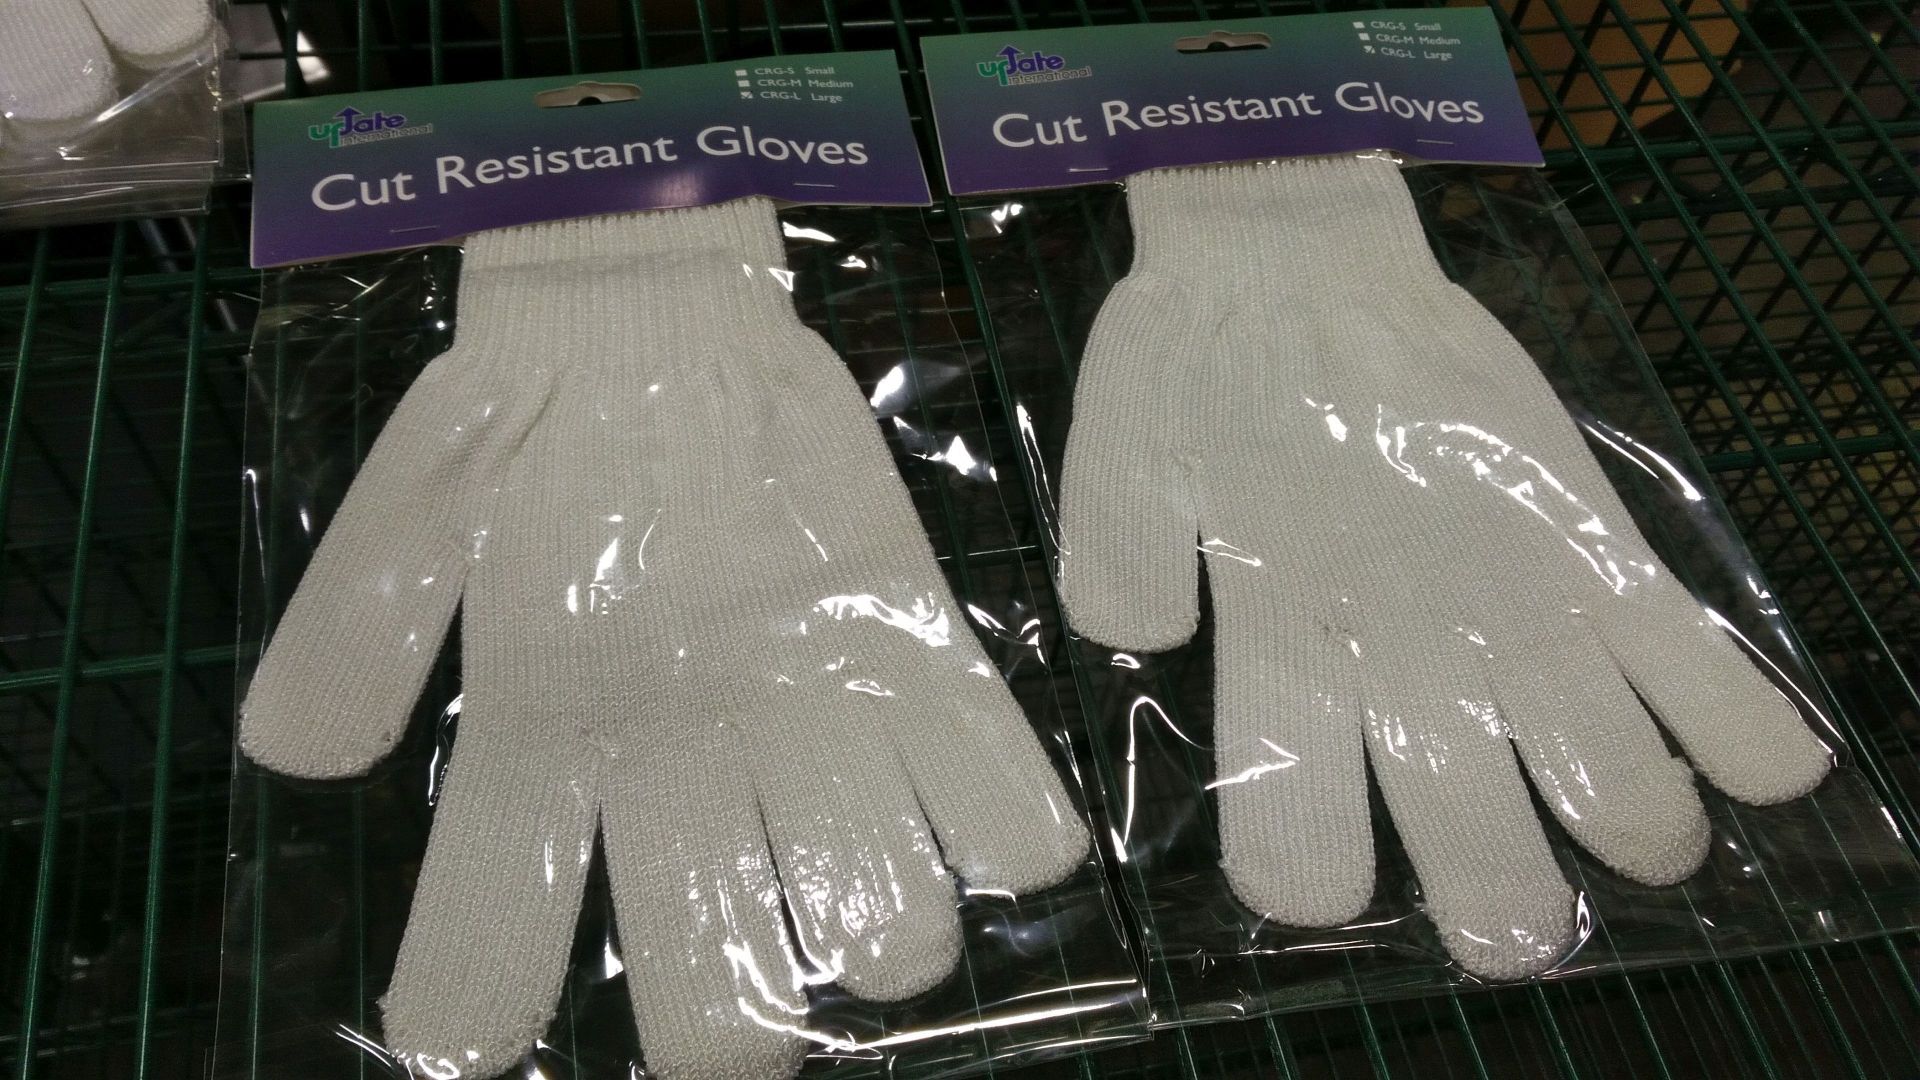 Large (10.25") Cut-Resistant Gloves - Lot of 2